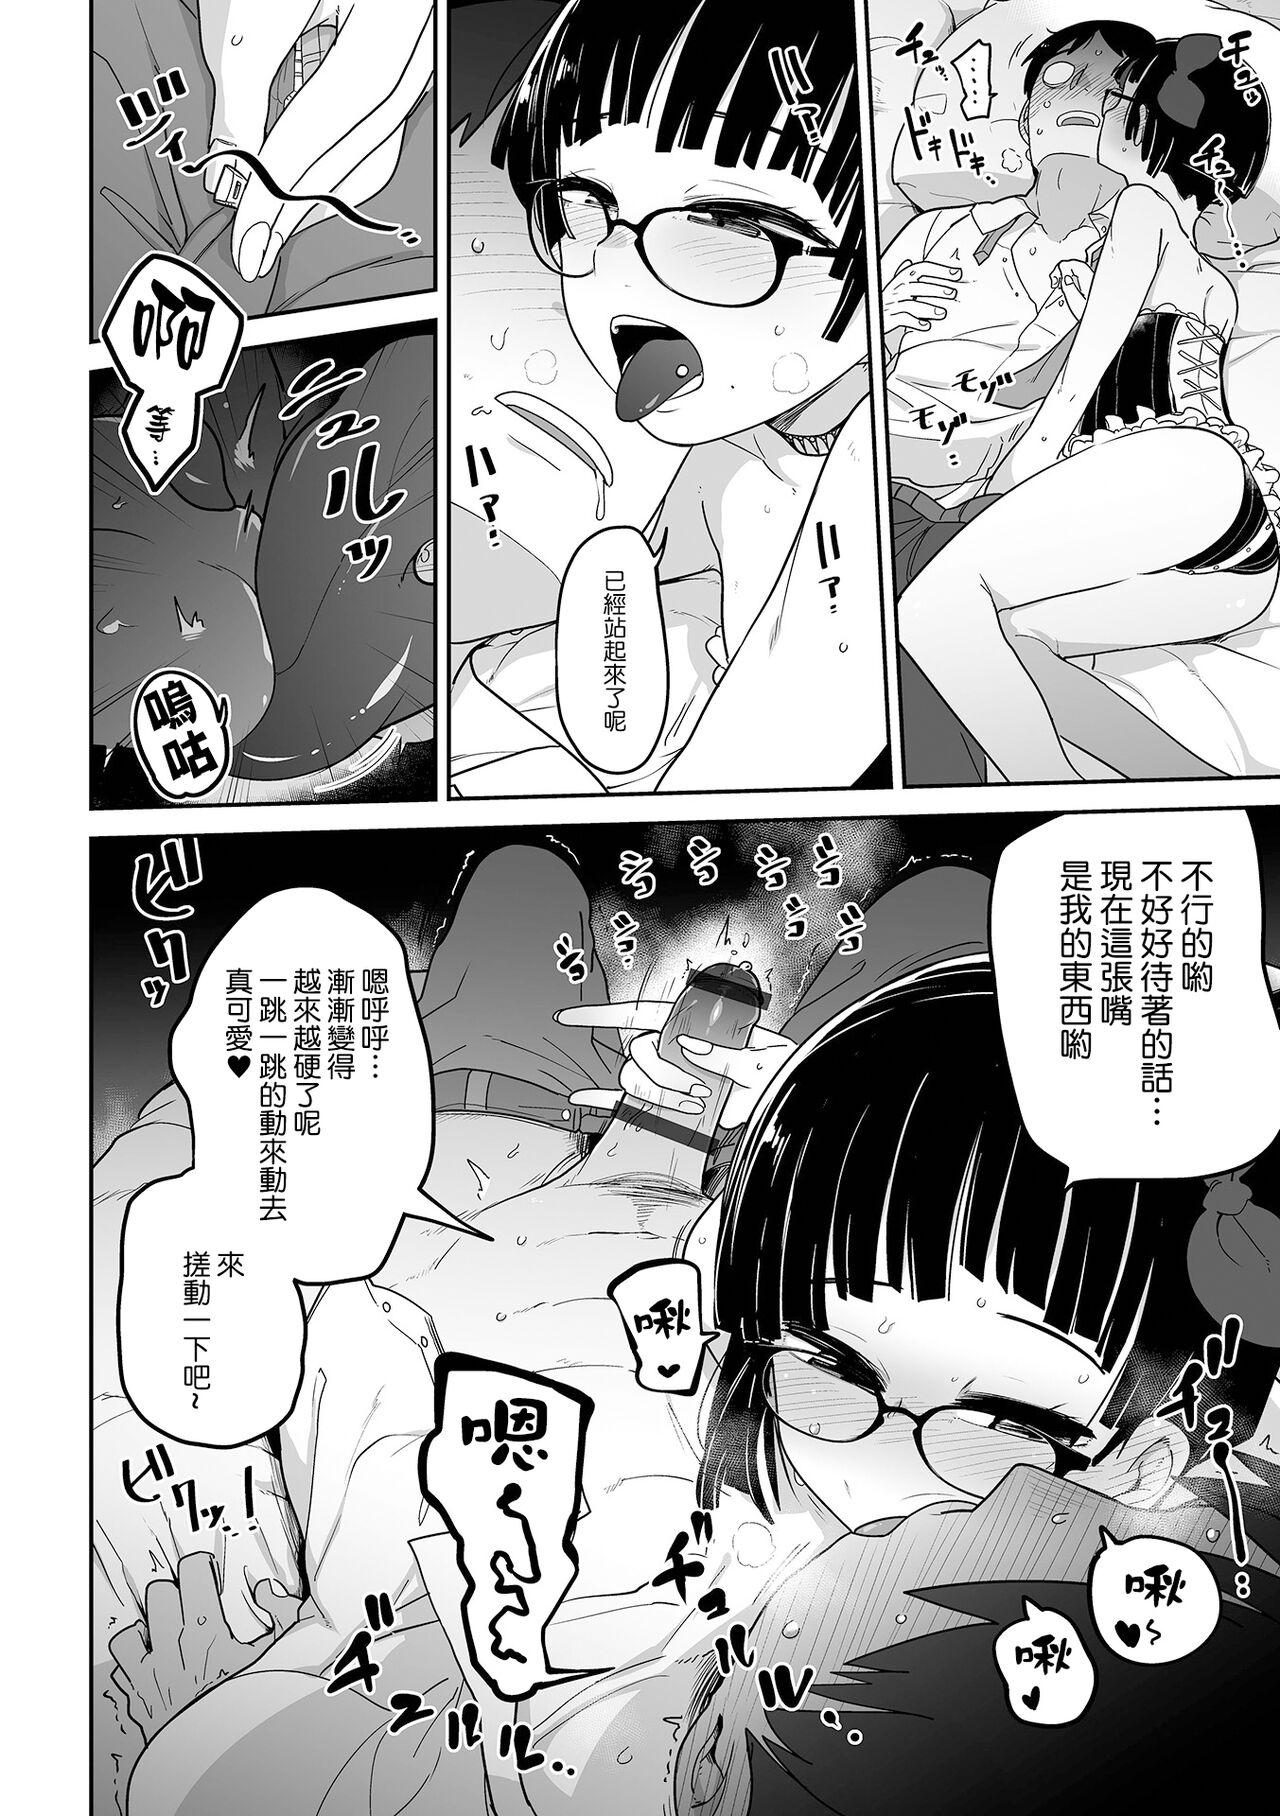 Amature Sex Kesson Shoukan e Youkoso | 歡迎來到殘缺娼館！ Pay - Page 7